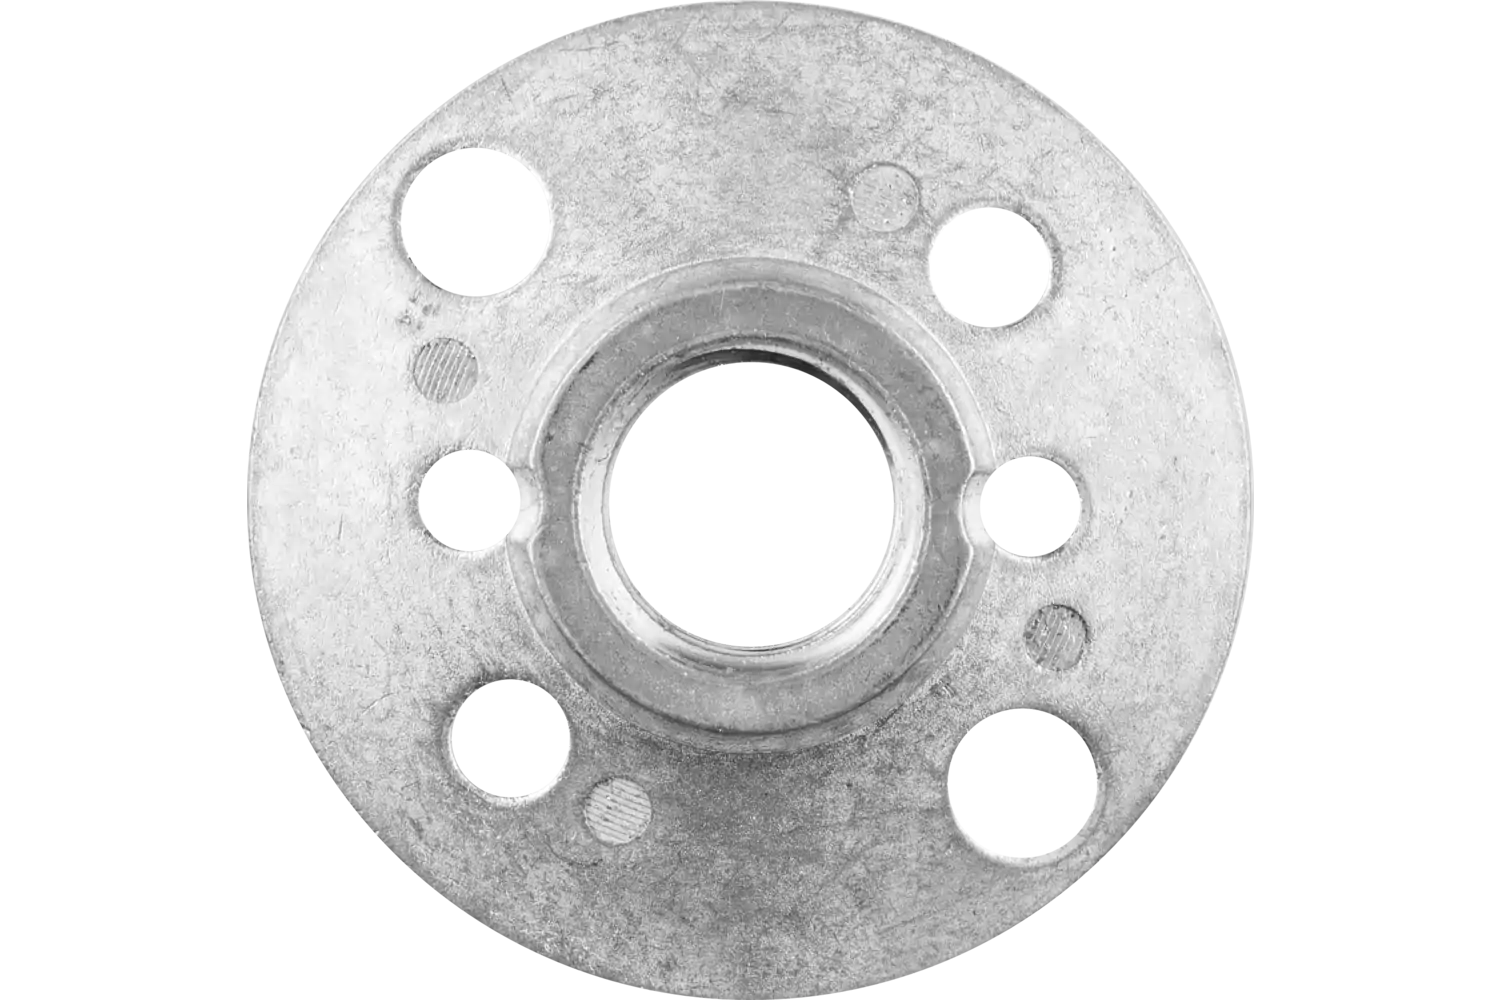 Fiber Disc Backing Pad Replacement Clamping Nut for 4"- 5 Backing Pads, 5/8-11 1